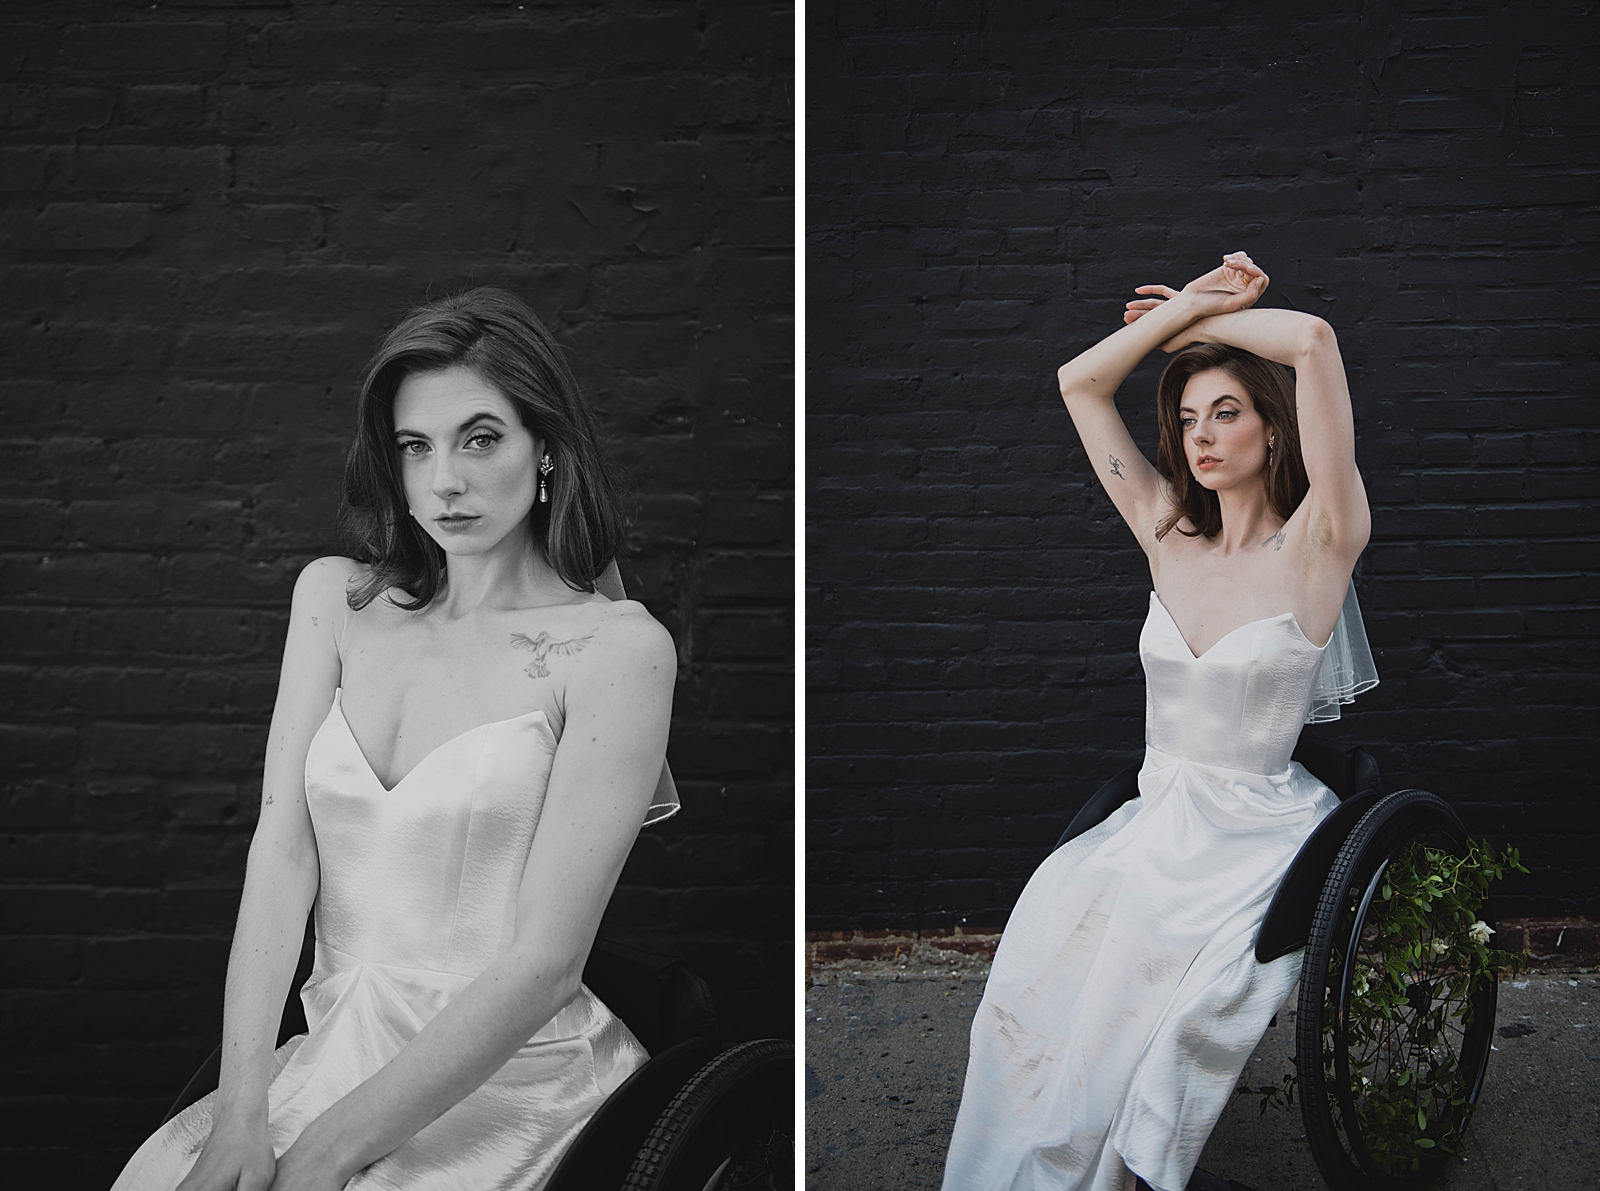 Left photo: Upper body black and white shot of the bride posing in front of a black brick wall. 
Right photo: Shot of the bride posing in front of a black brick wall. 